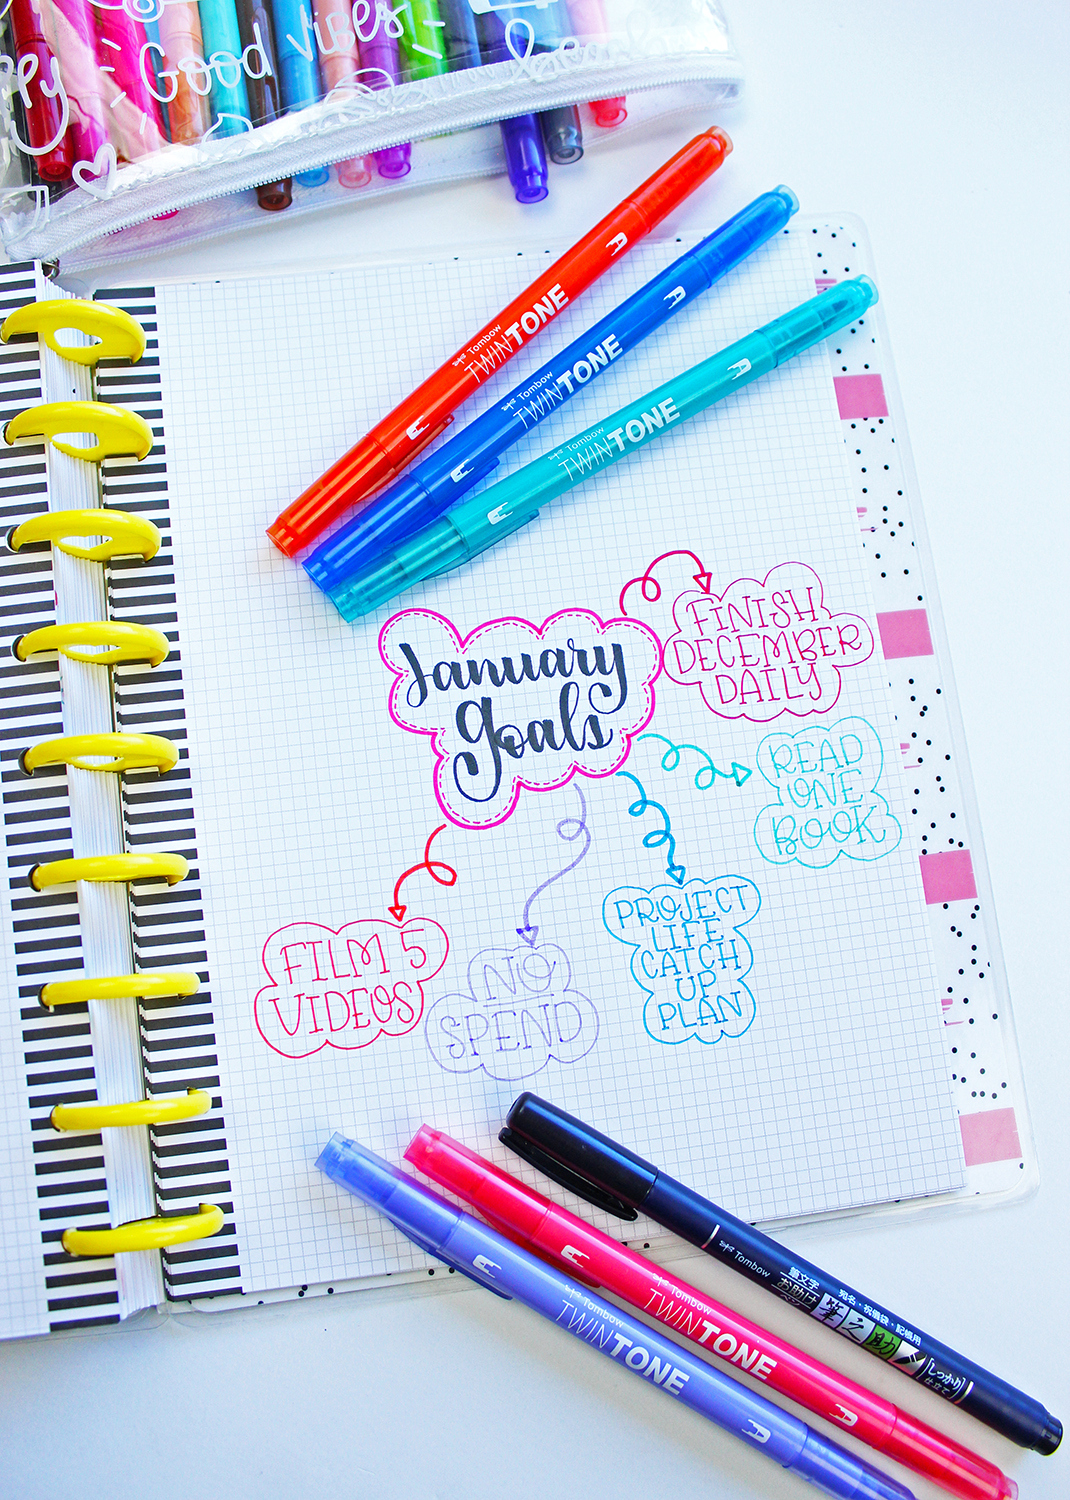 If getting organized is on your agenda this year check out this list! @jenniegarcian created this list with the best planner products! #planner #tombow 